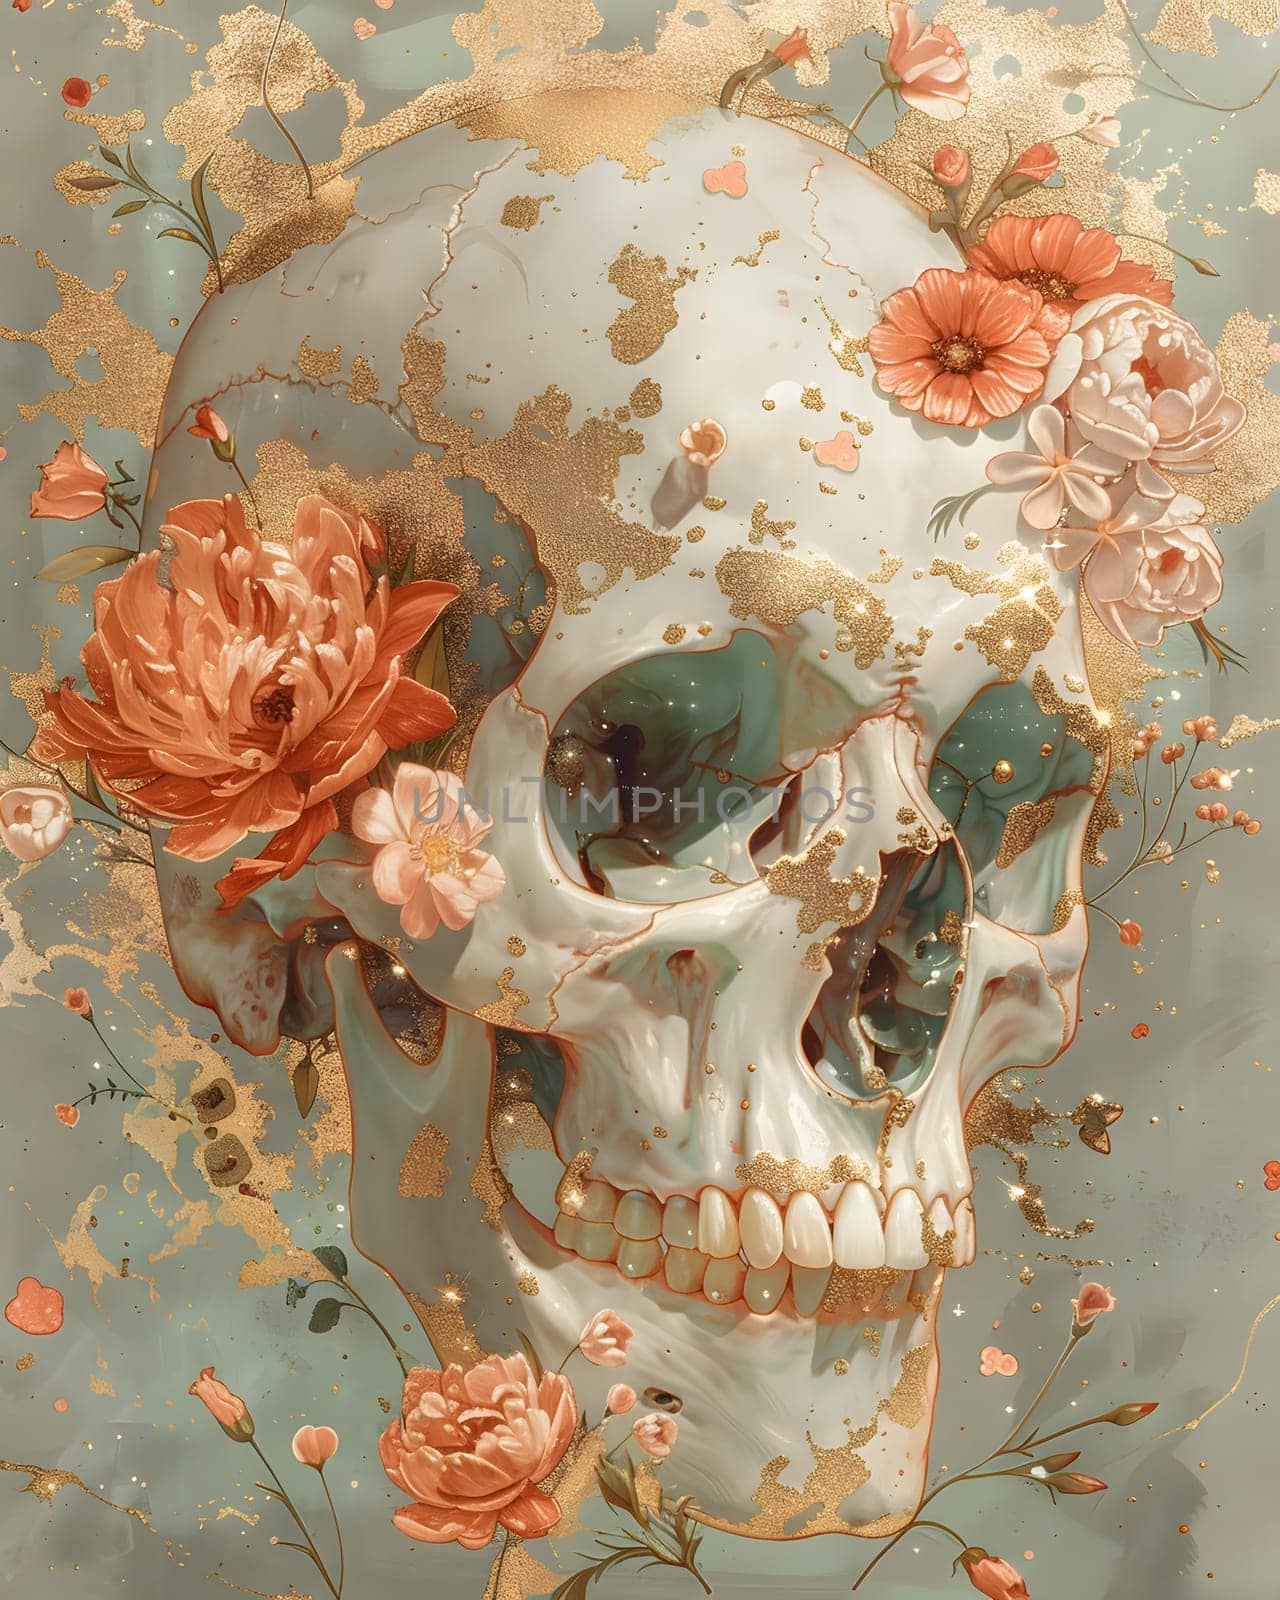 A painting of a skull surrounded by flowers on a blue background. The artwork features intricate details of bone structure and delicate petals, blending nature and death in visual arts